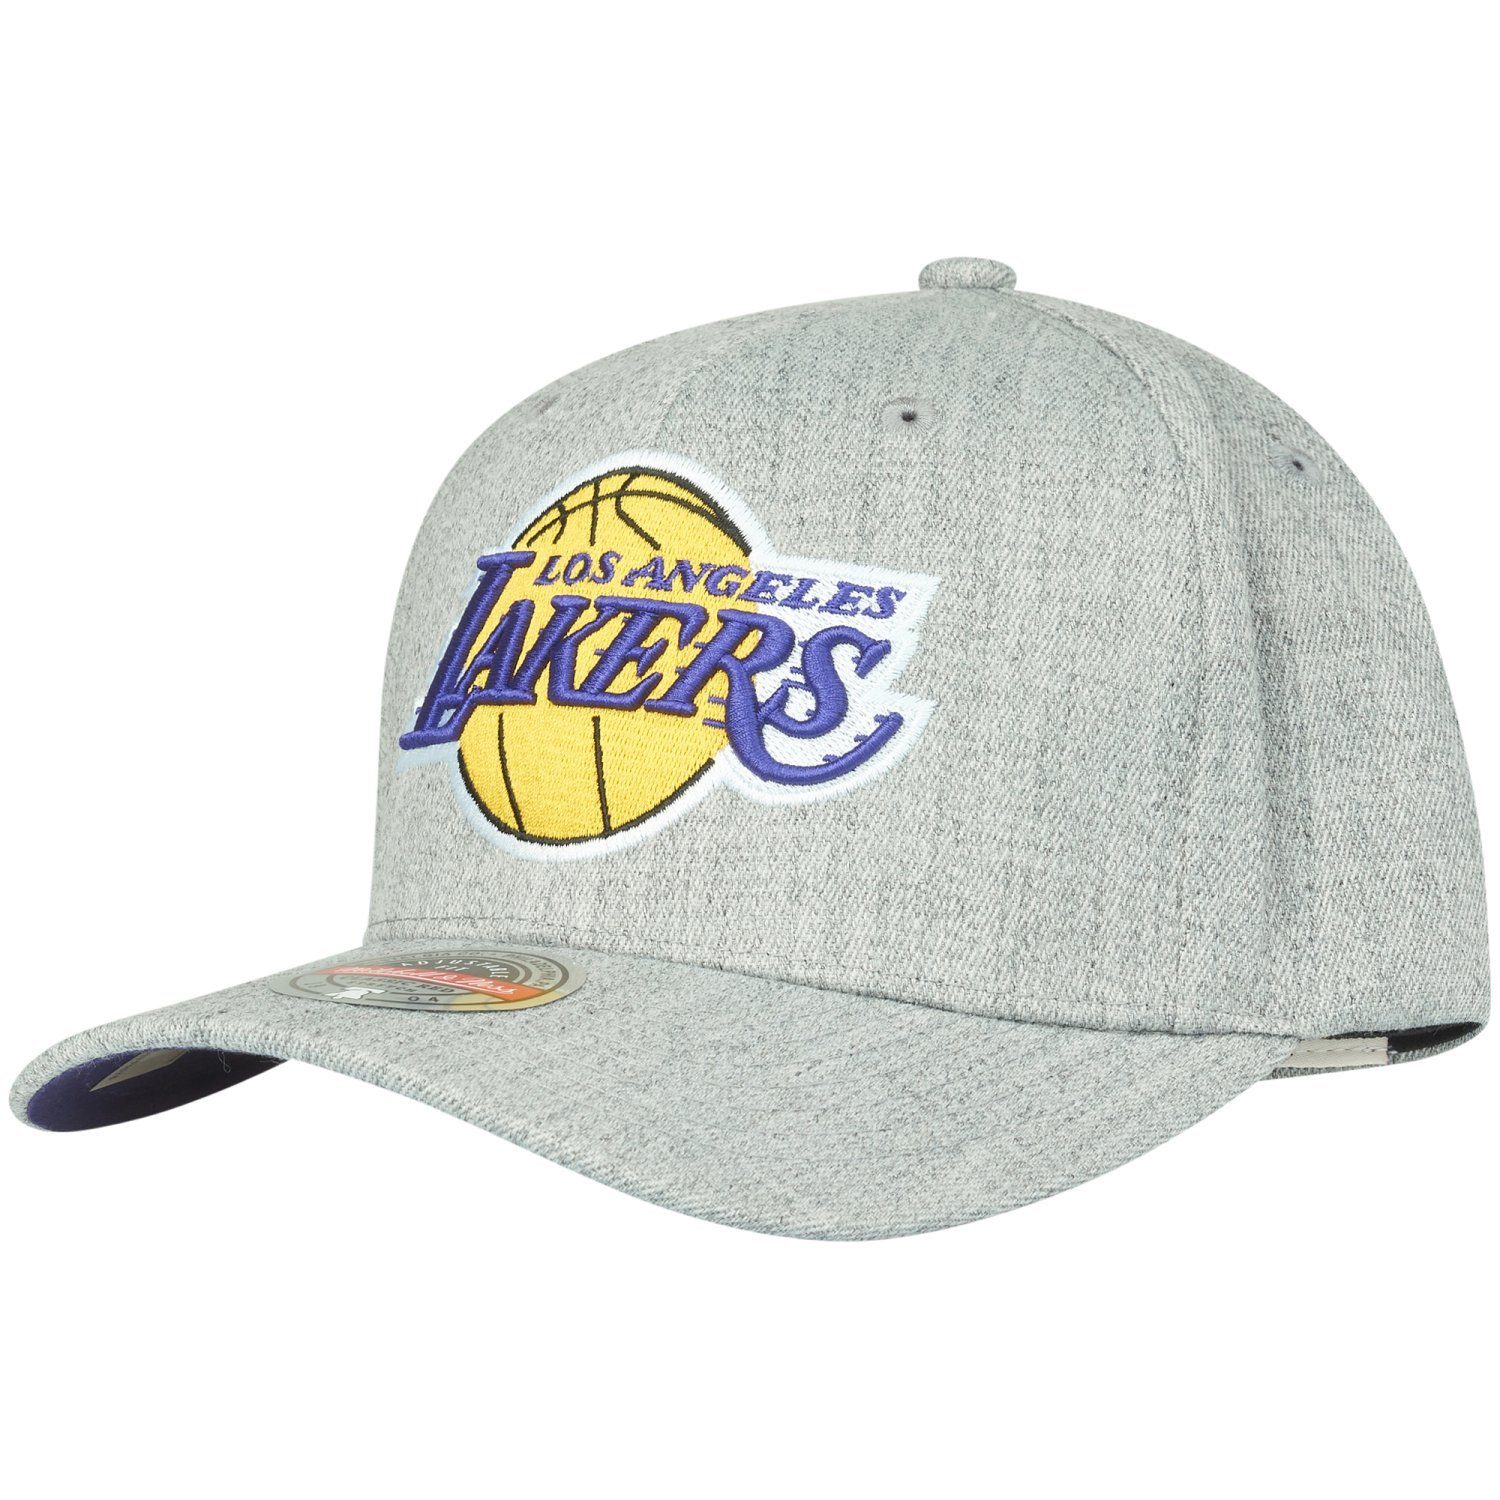 Mitchell & Ness Snapback Cap Stretch 2.0 Los Angeles Lakers